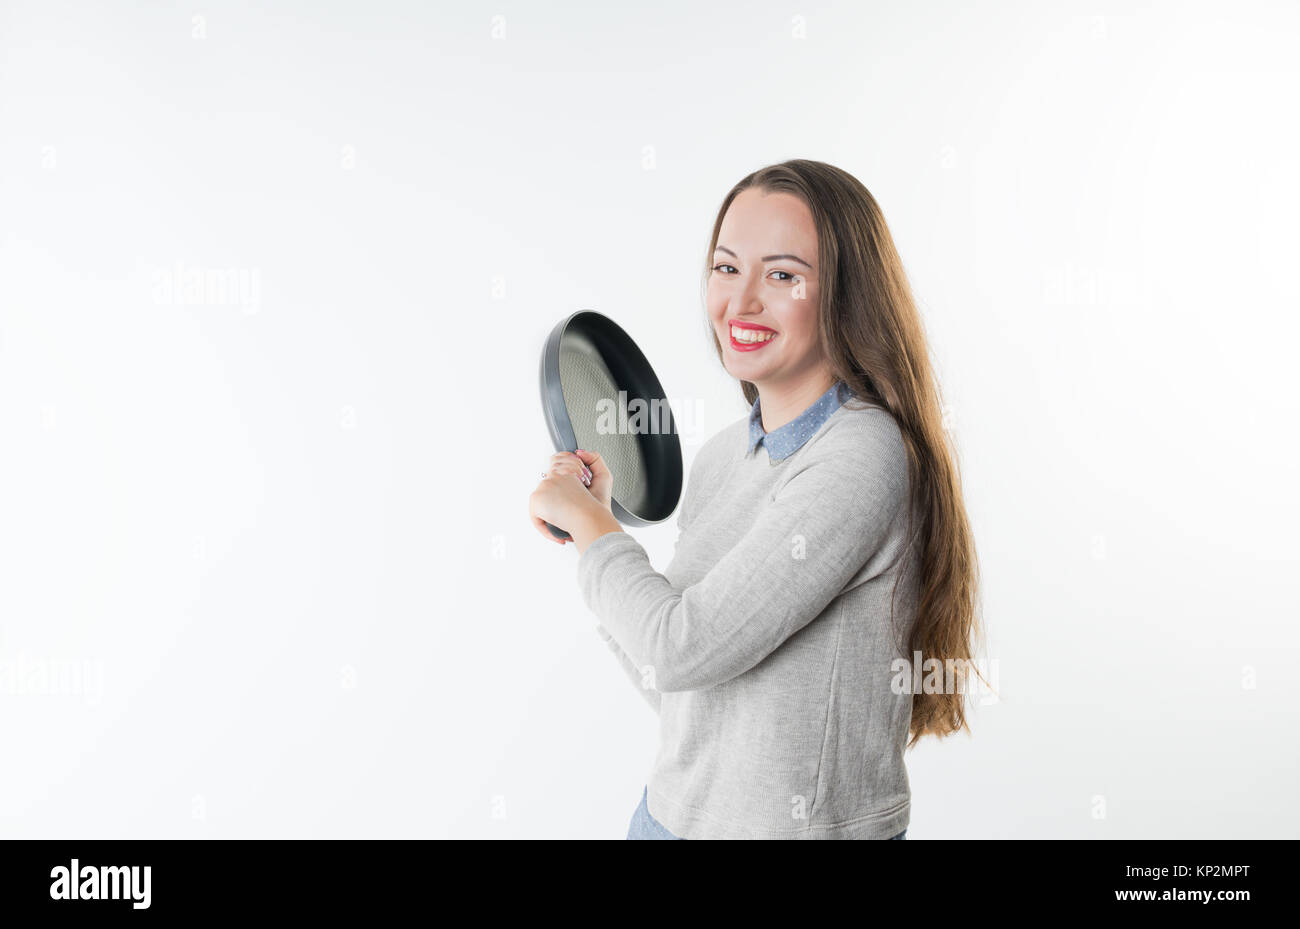 Angry smiling woman with insult laugh on her face and frying pan Stock Photo